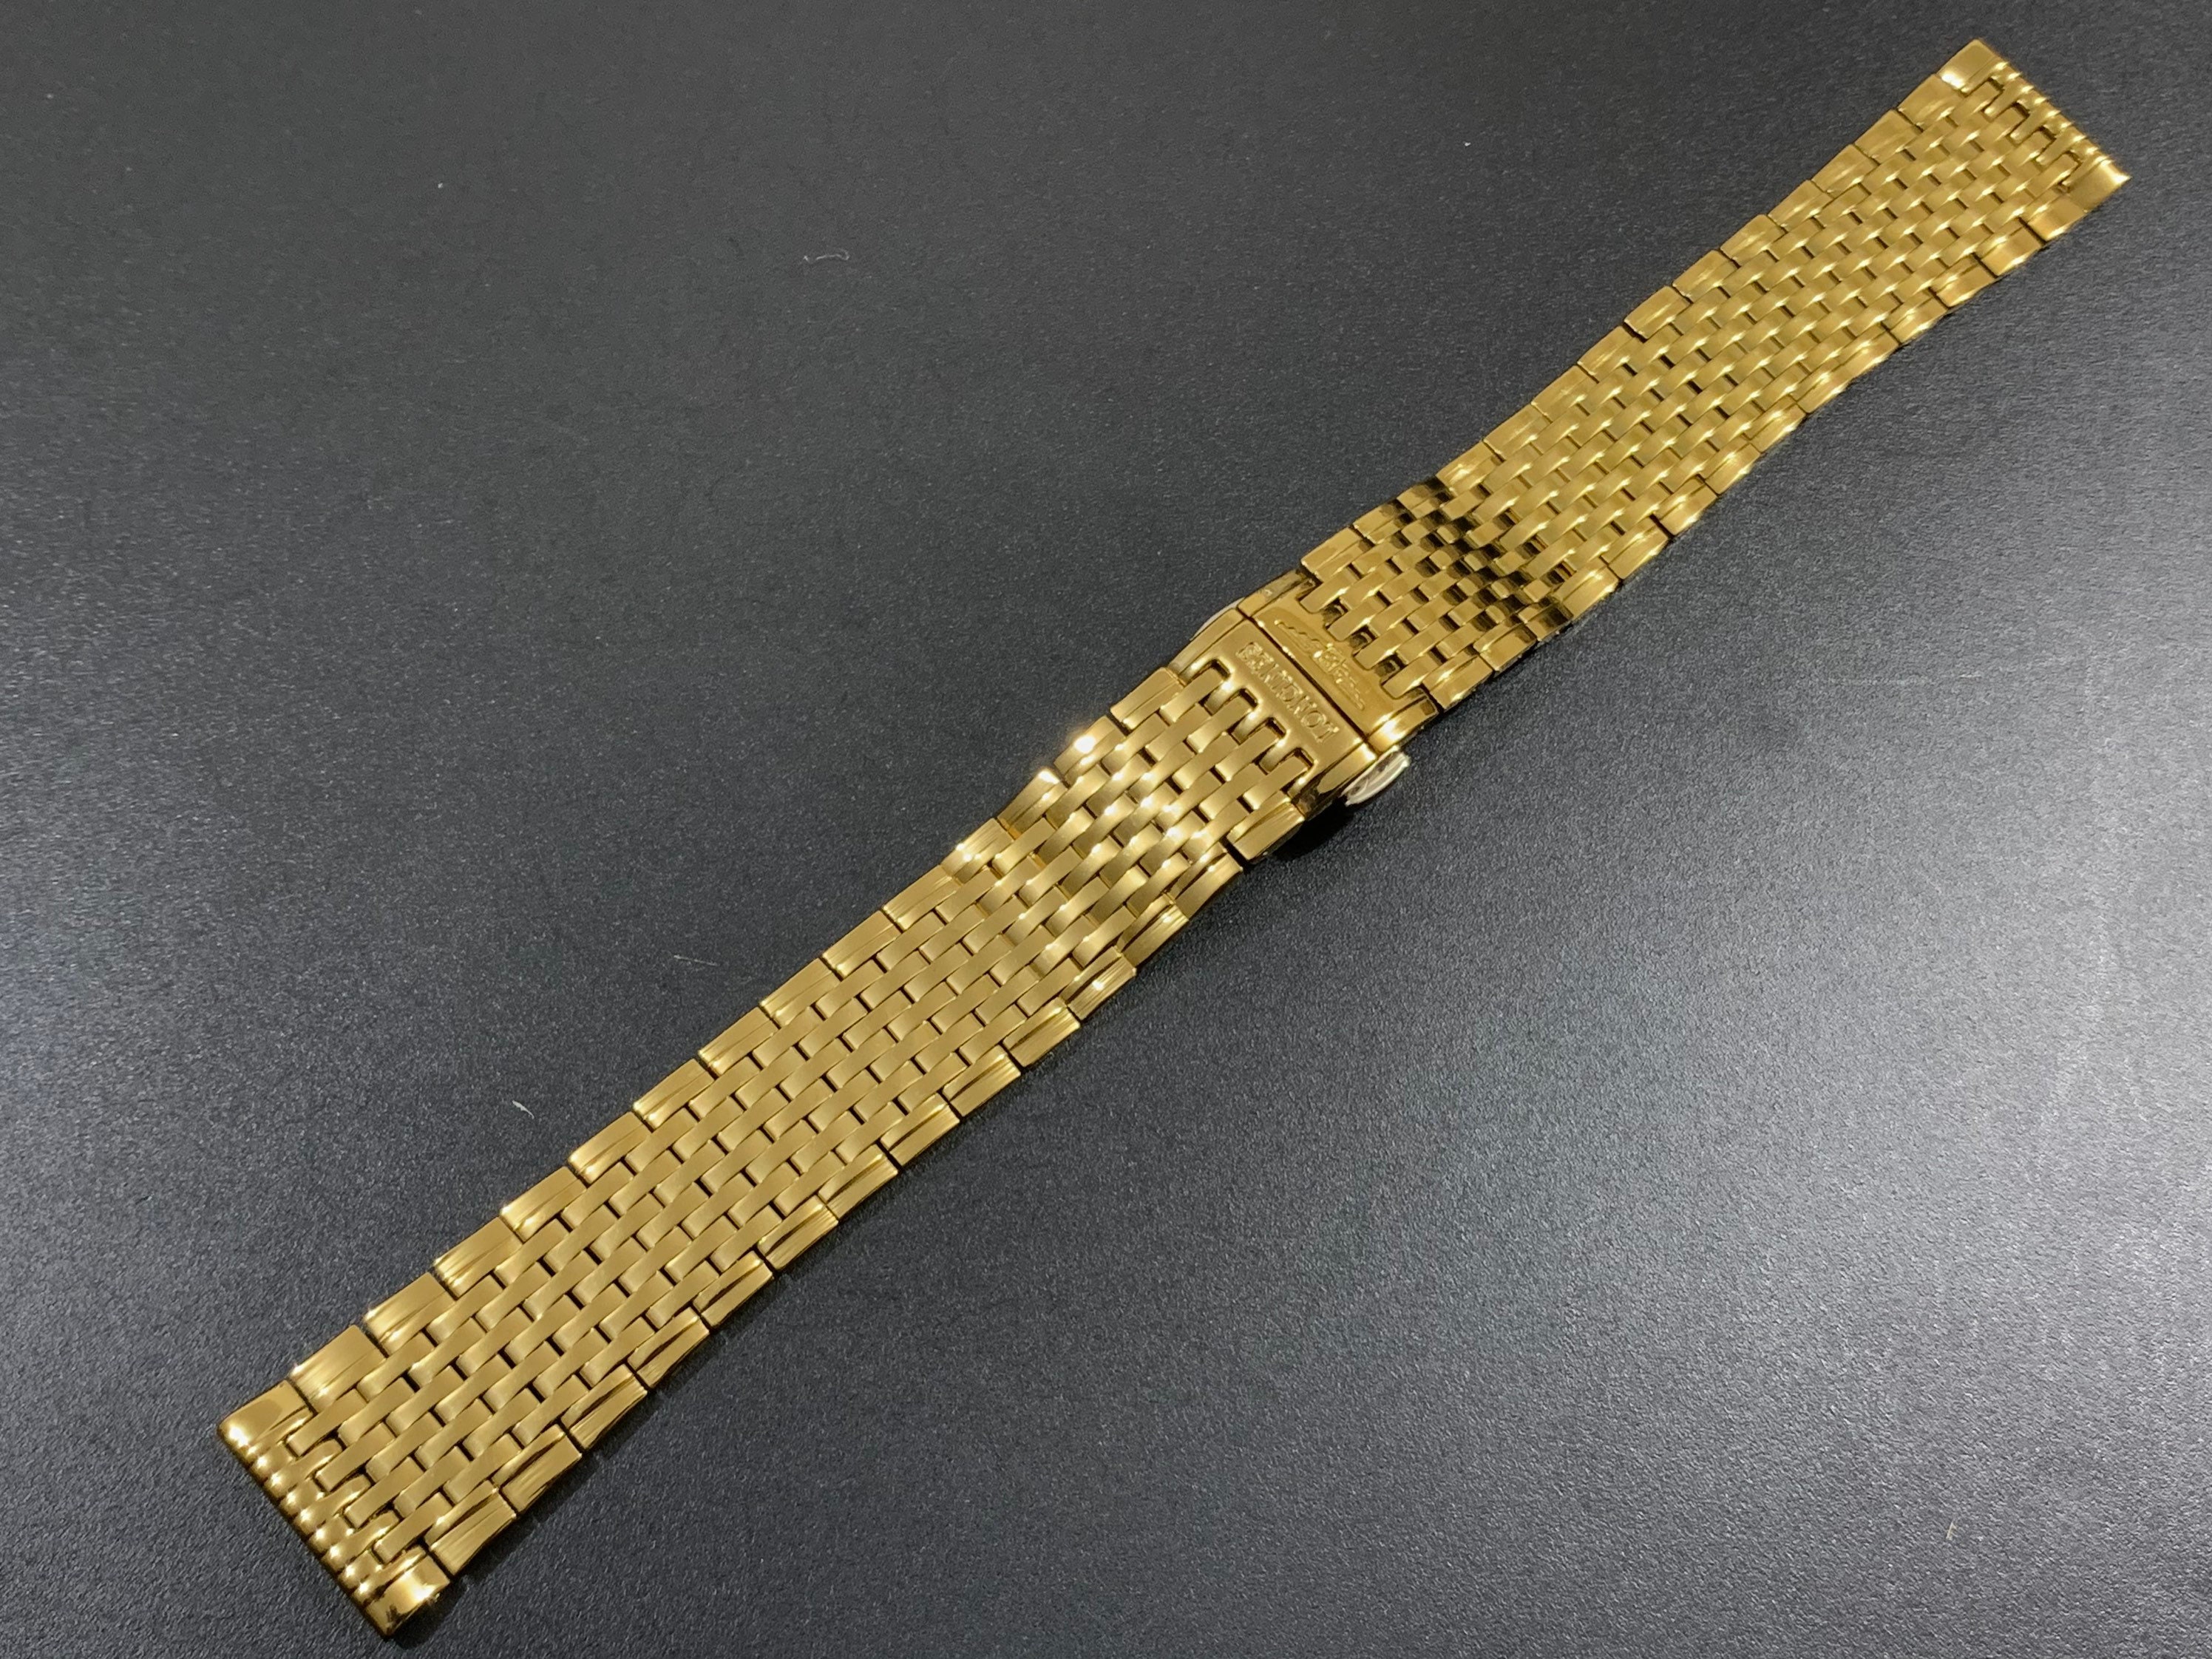 Buy Quality 18K Gold Women's Watch | Pre-Order Now!